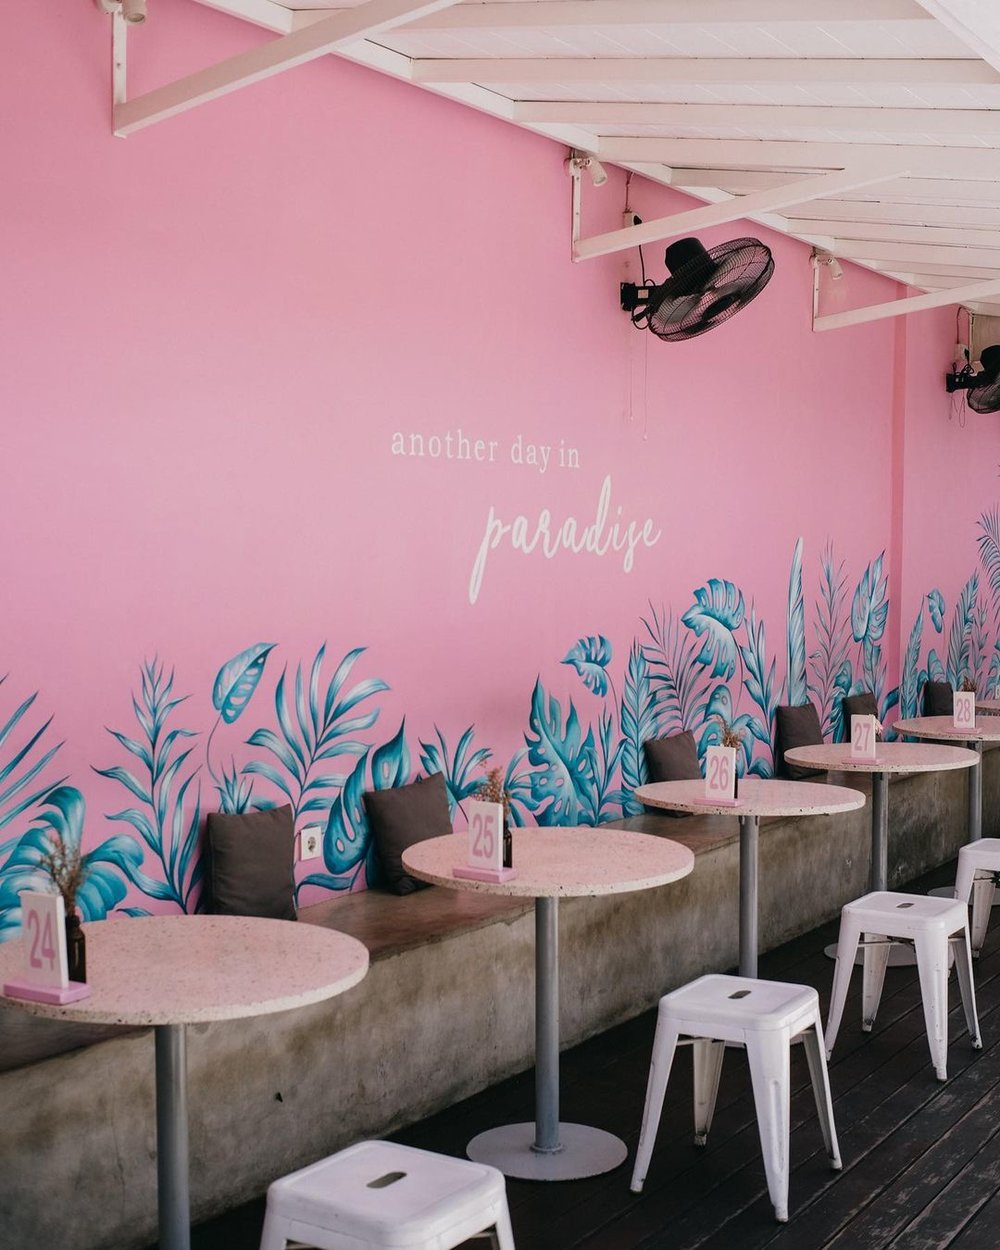 14 Aesthetic Cafes in Bali 2022: Spots for Good Coffee, Brunch, & Laid